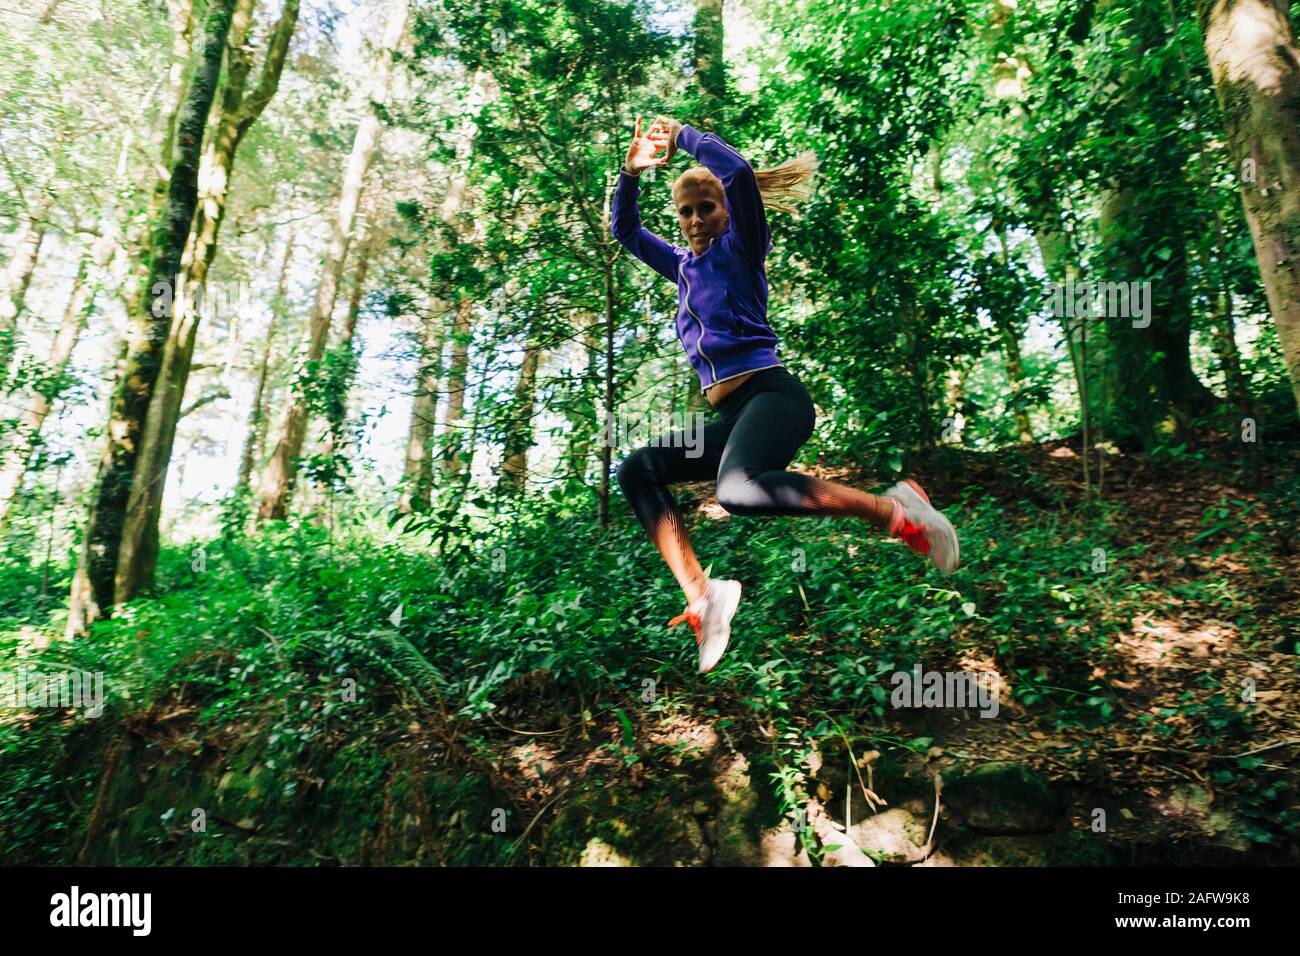 Portrait carefree female personal trainer hiking, jumping in forest Stock Photo